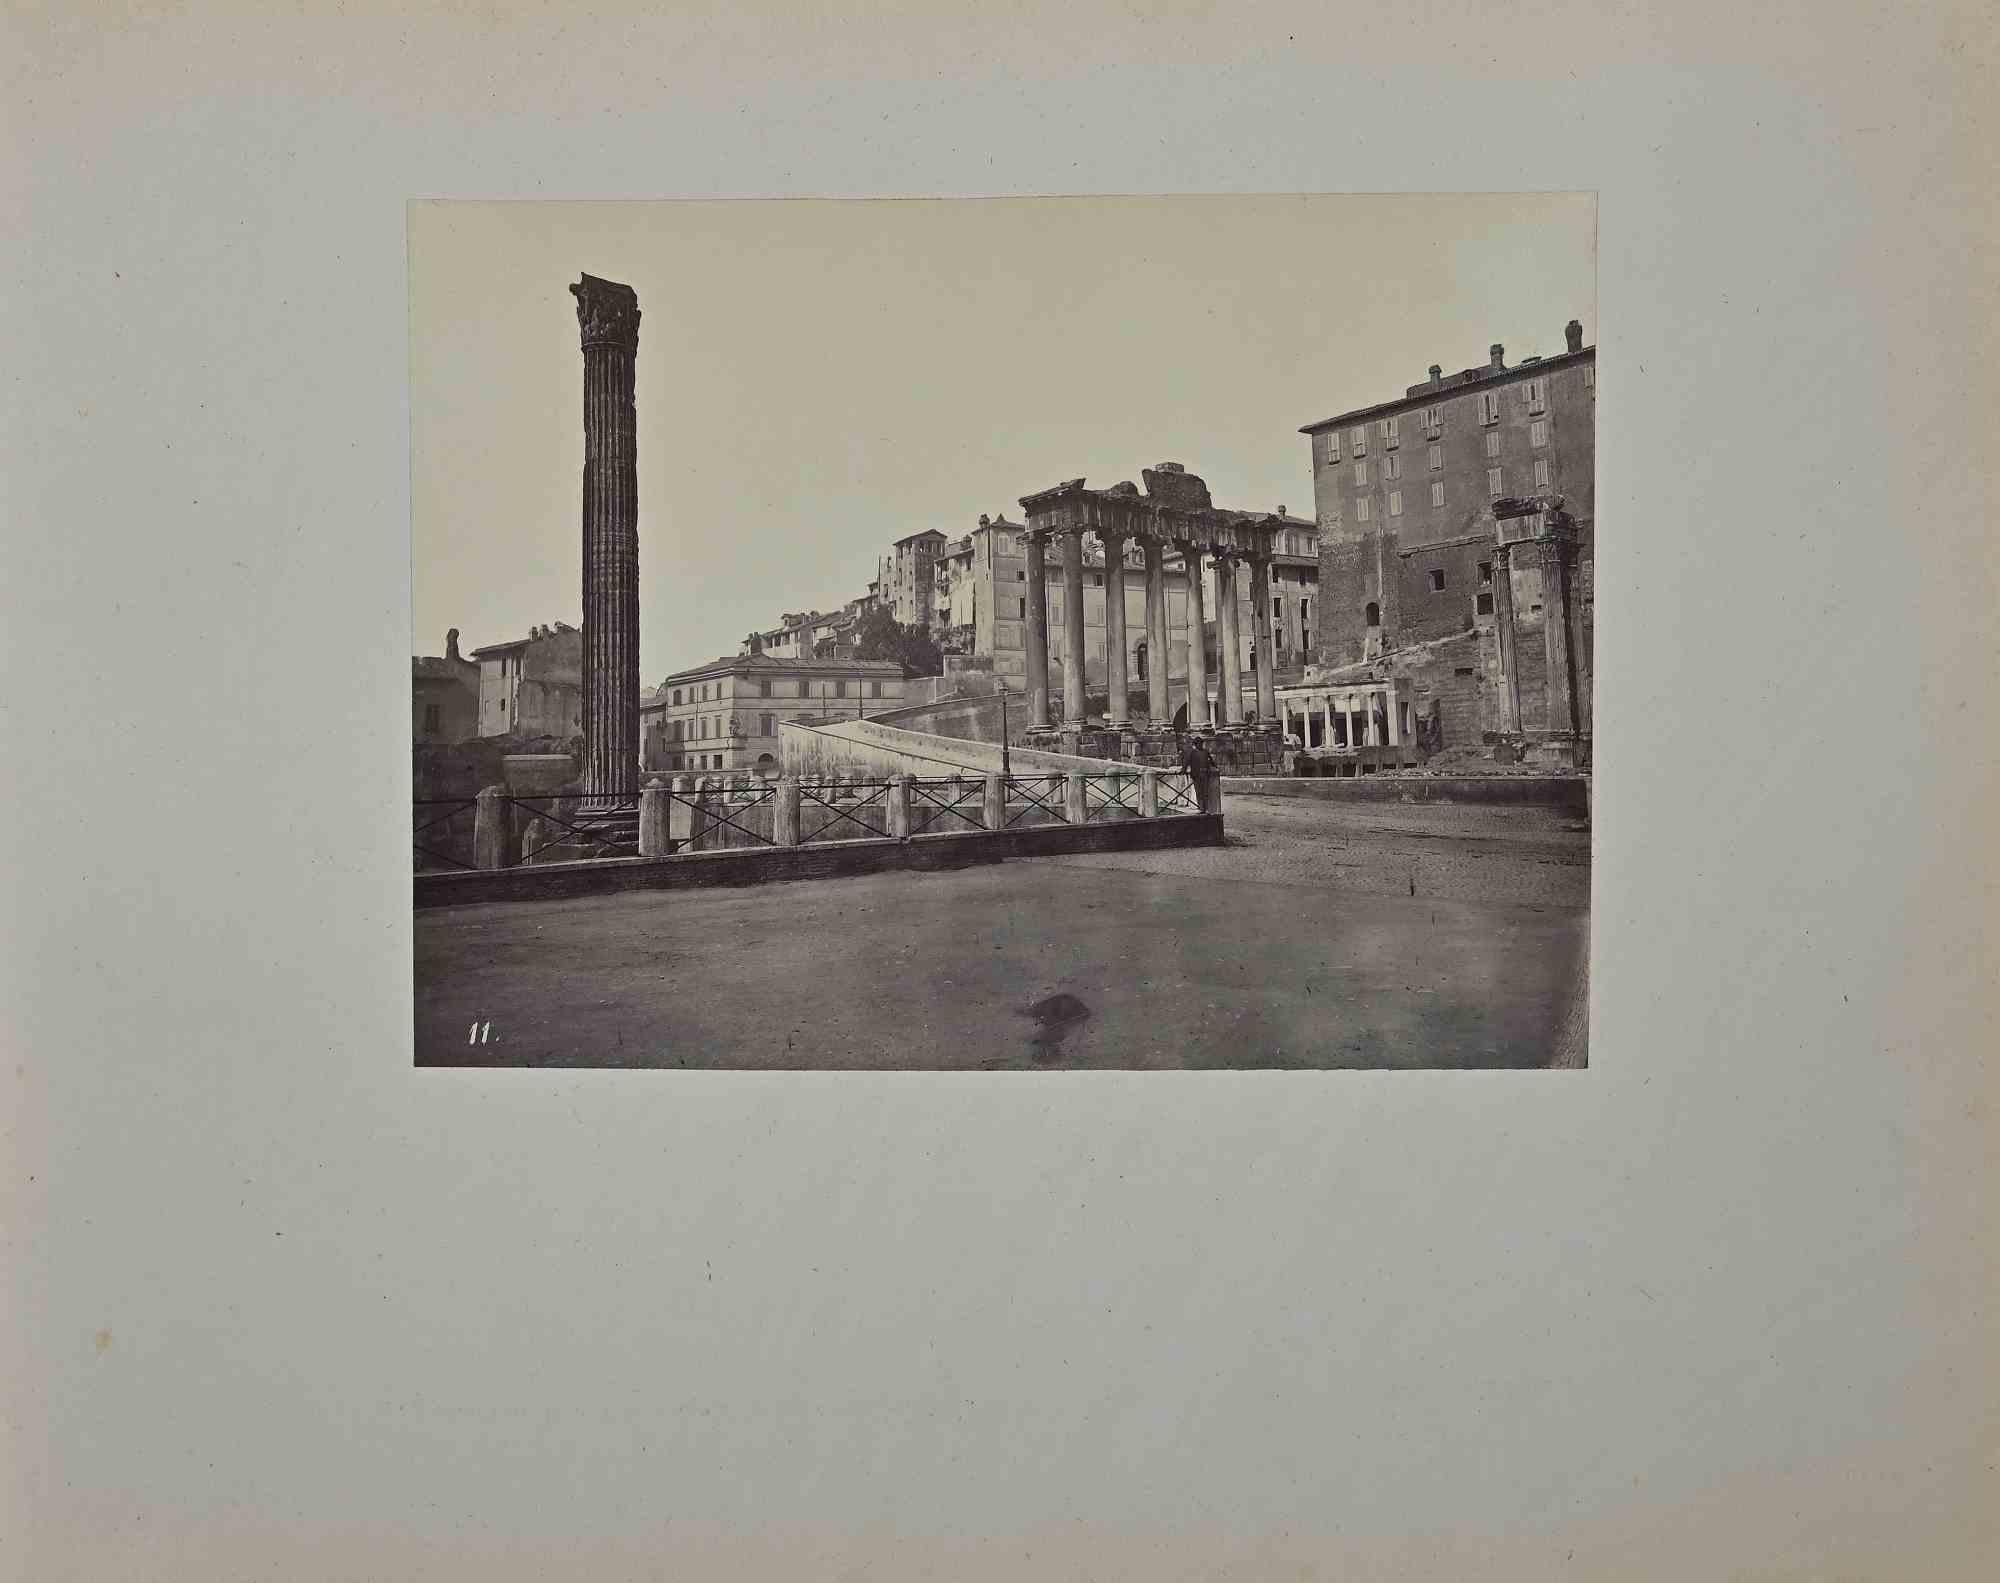 Francesco Sidoli Black and White Photograph - View of the Imperial Forums - Photograph by F. Sidoli - Late 19th Century